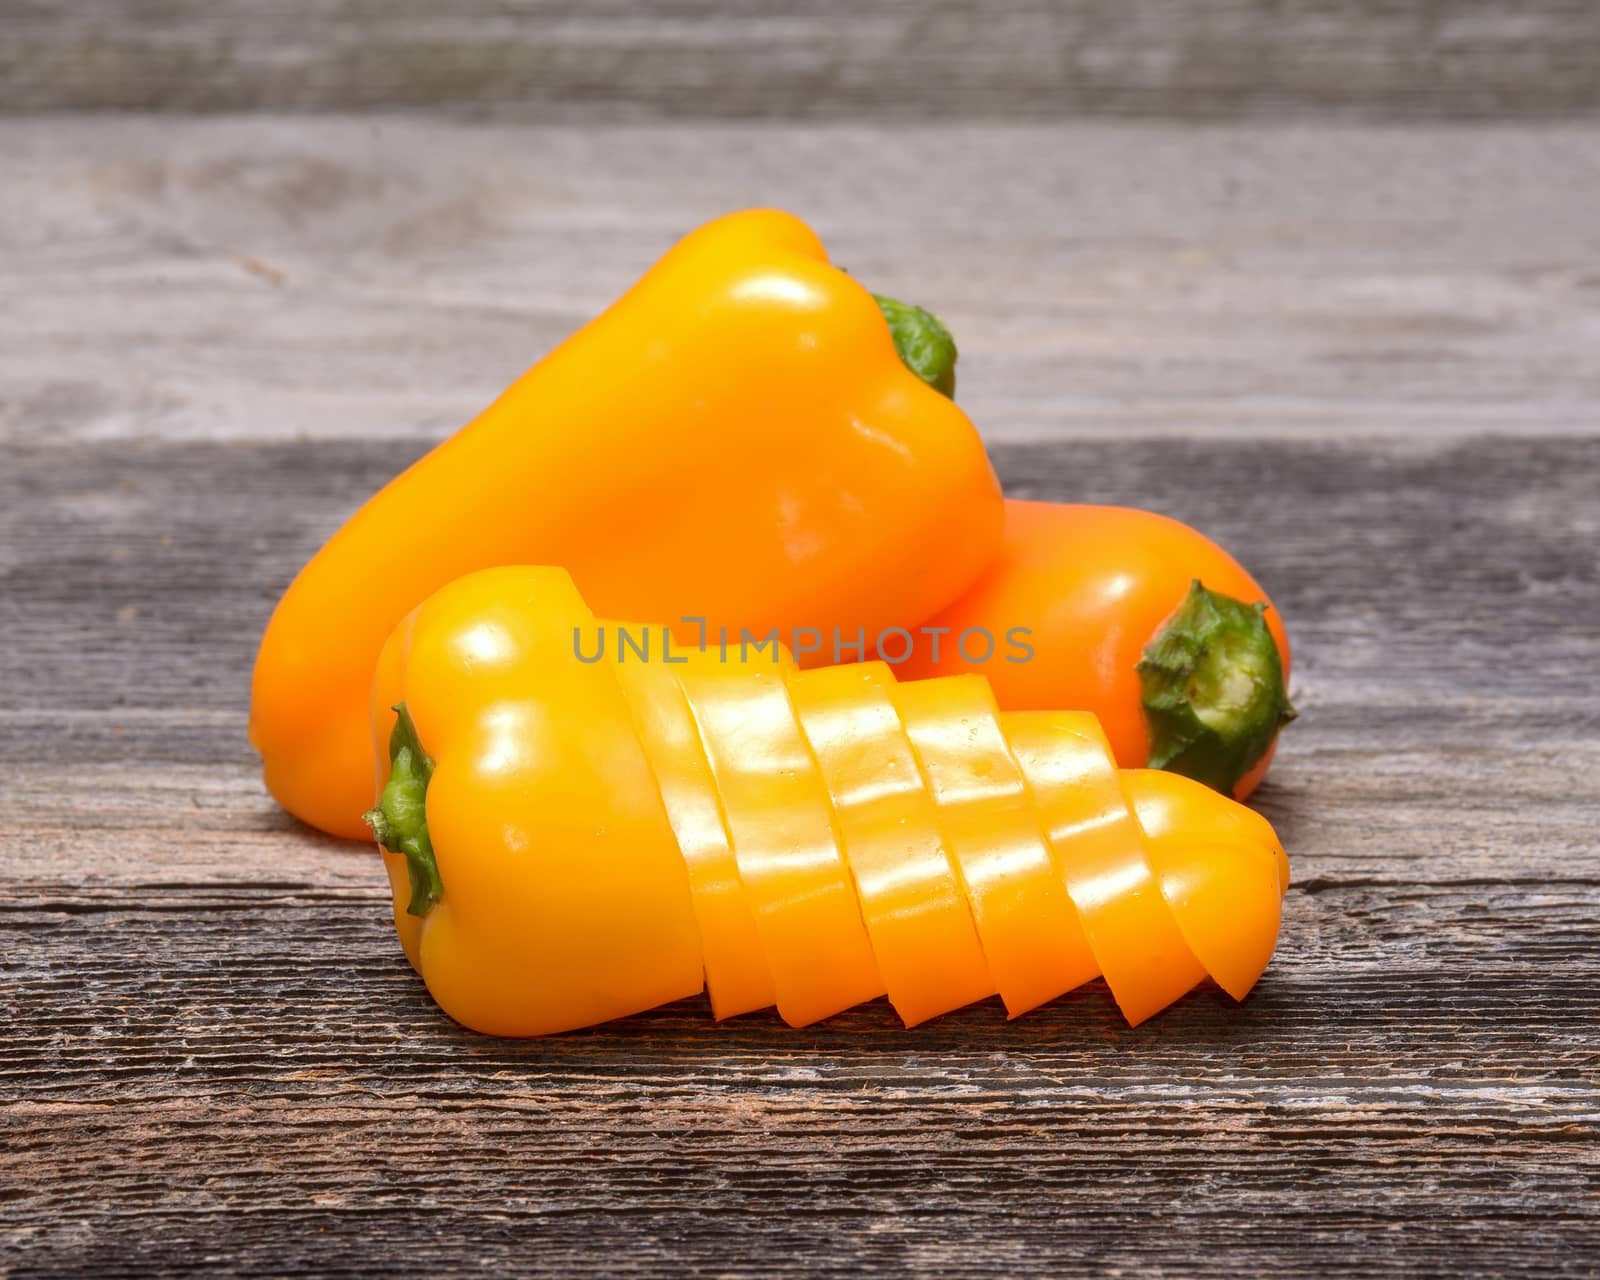 Fresh colorful capsicum on a wooden background